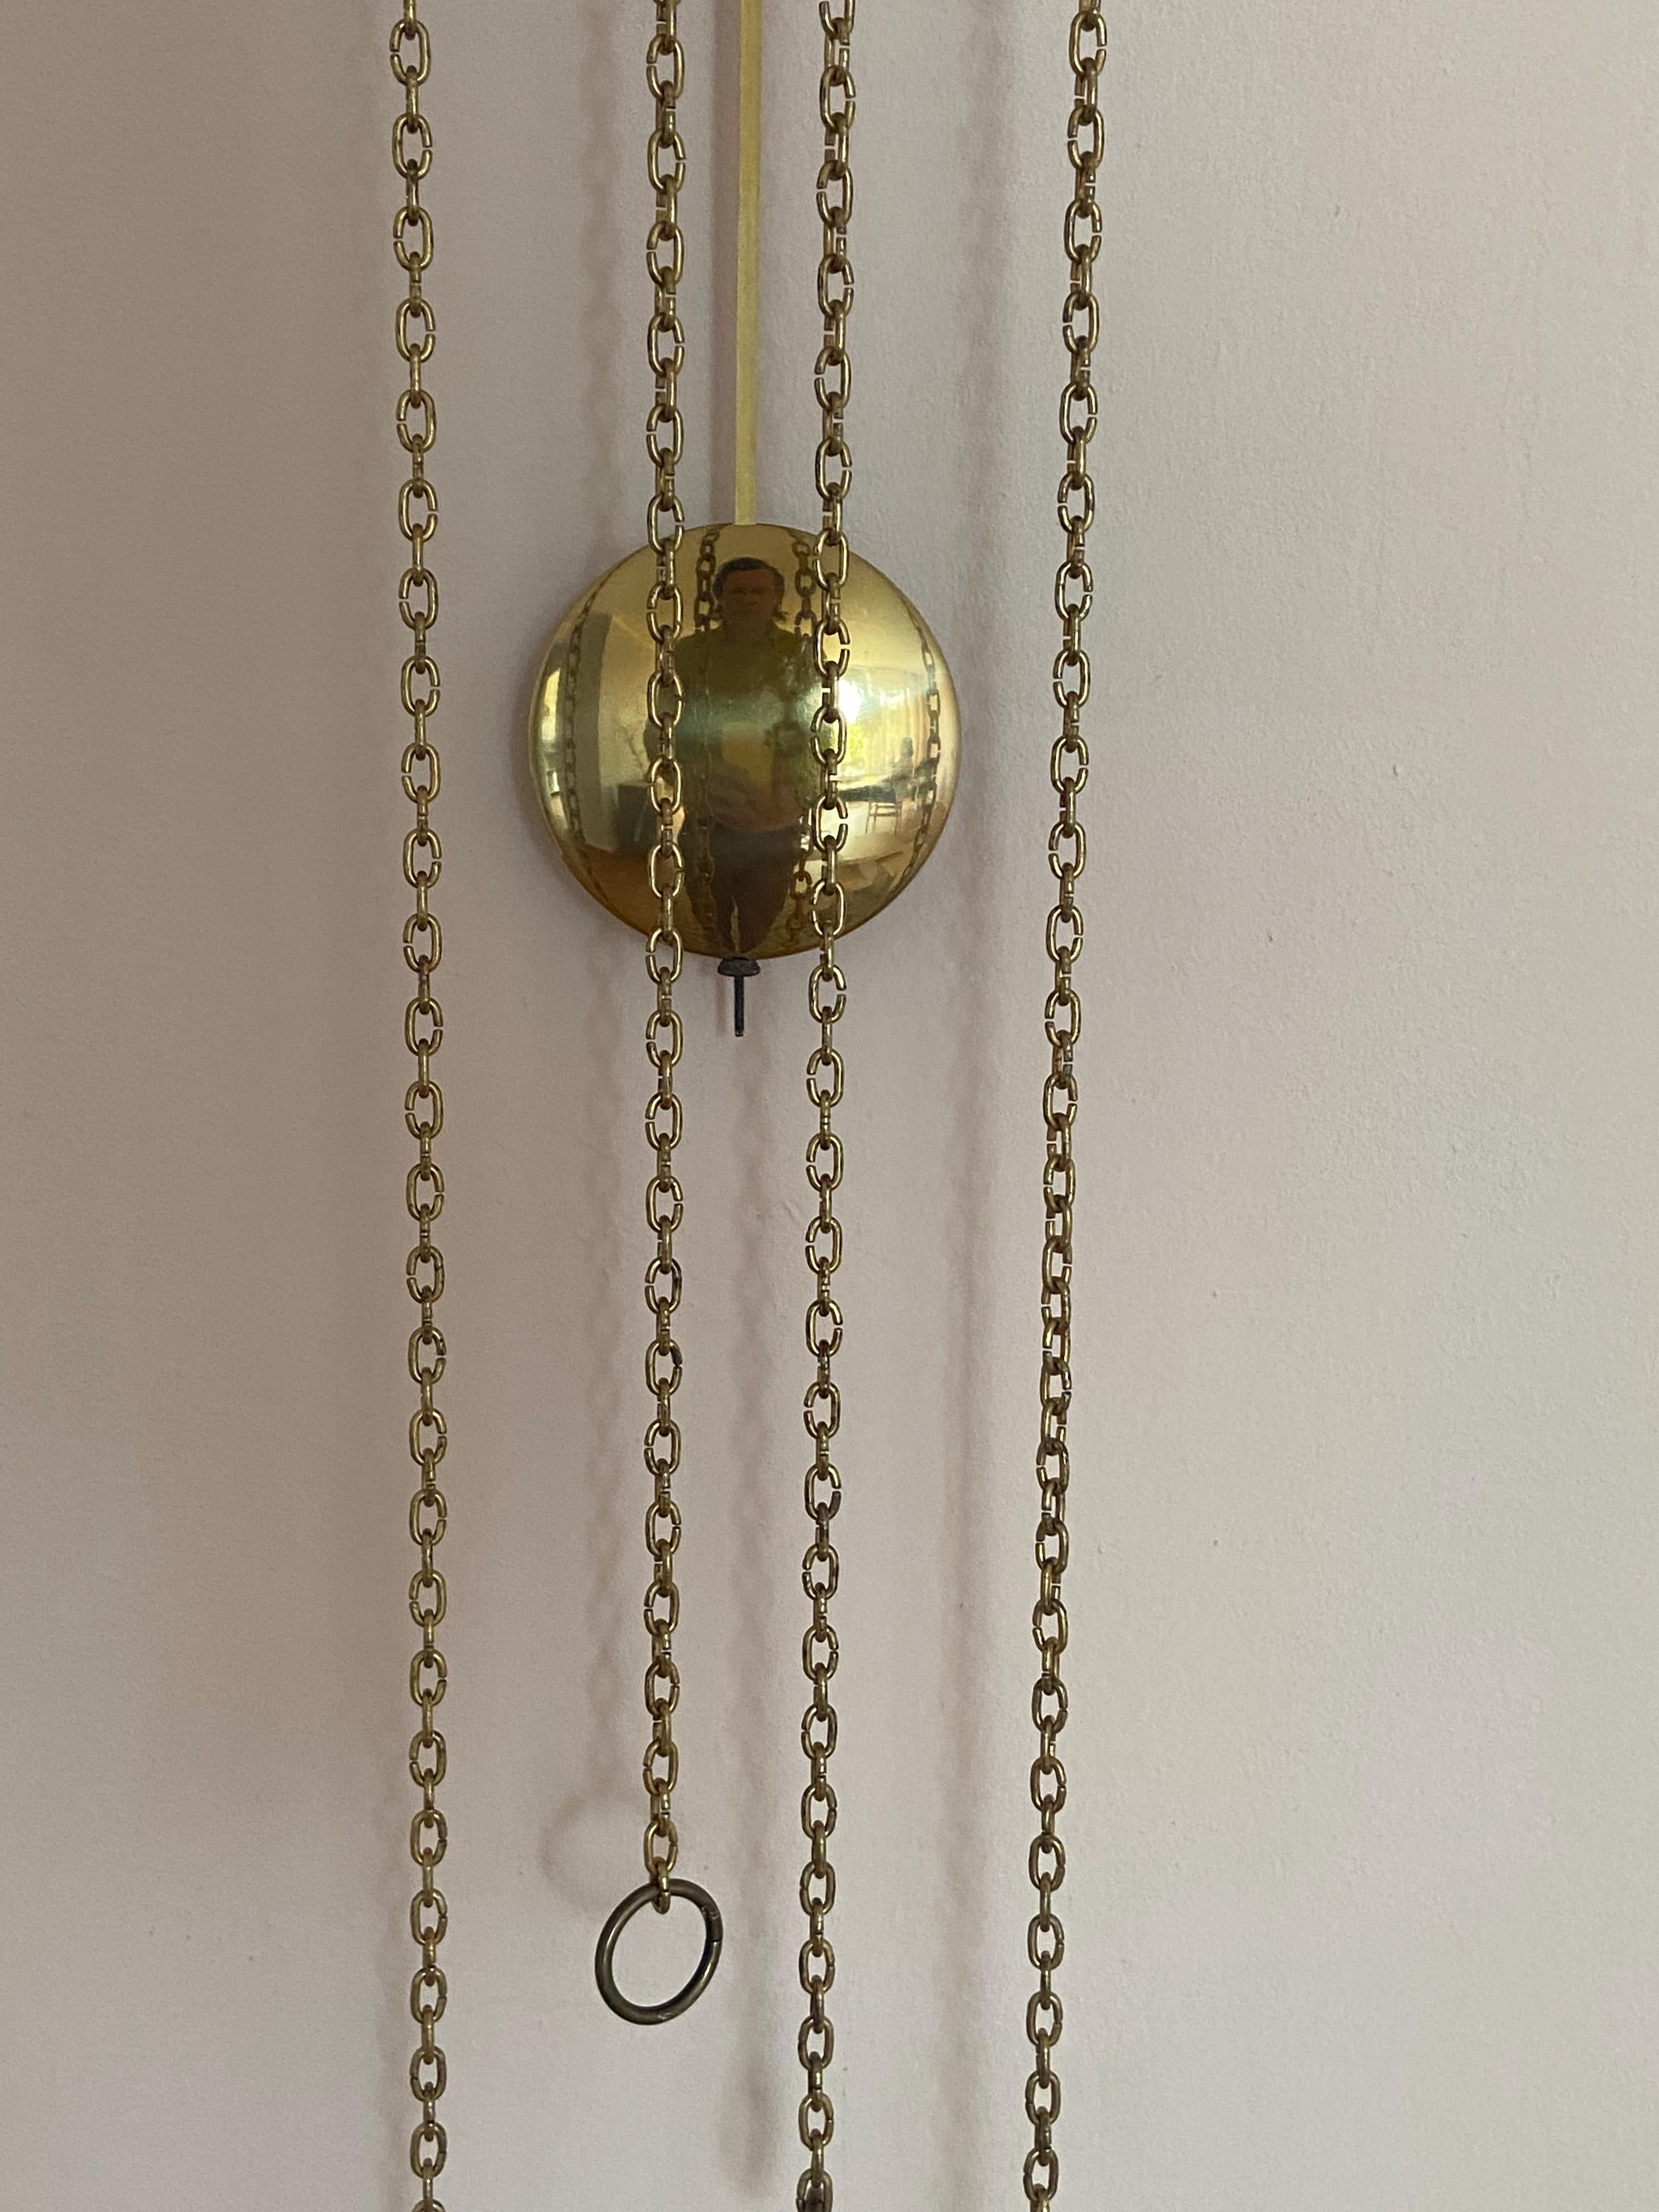 German 1960s Junghans Pendulum + Weights + Gong Wall Clock For Sale 3